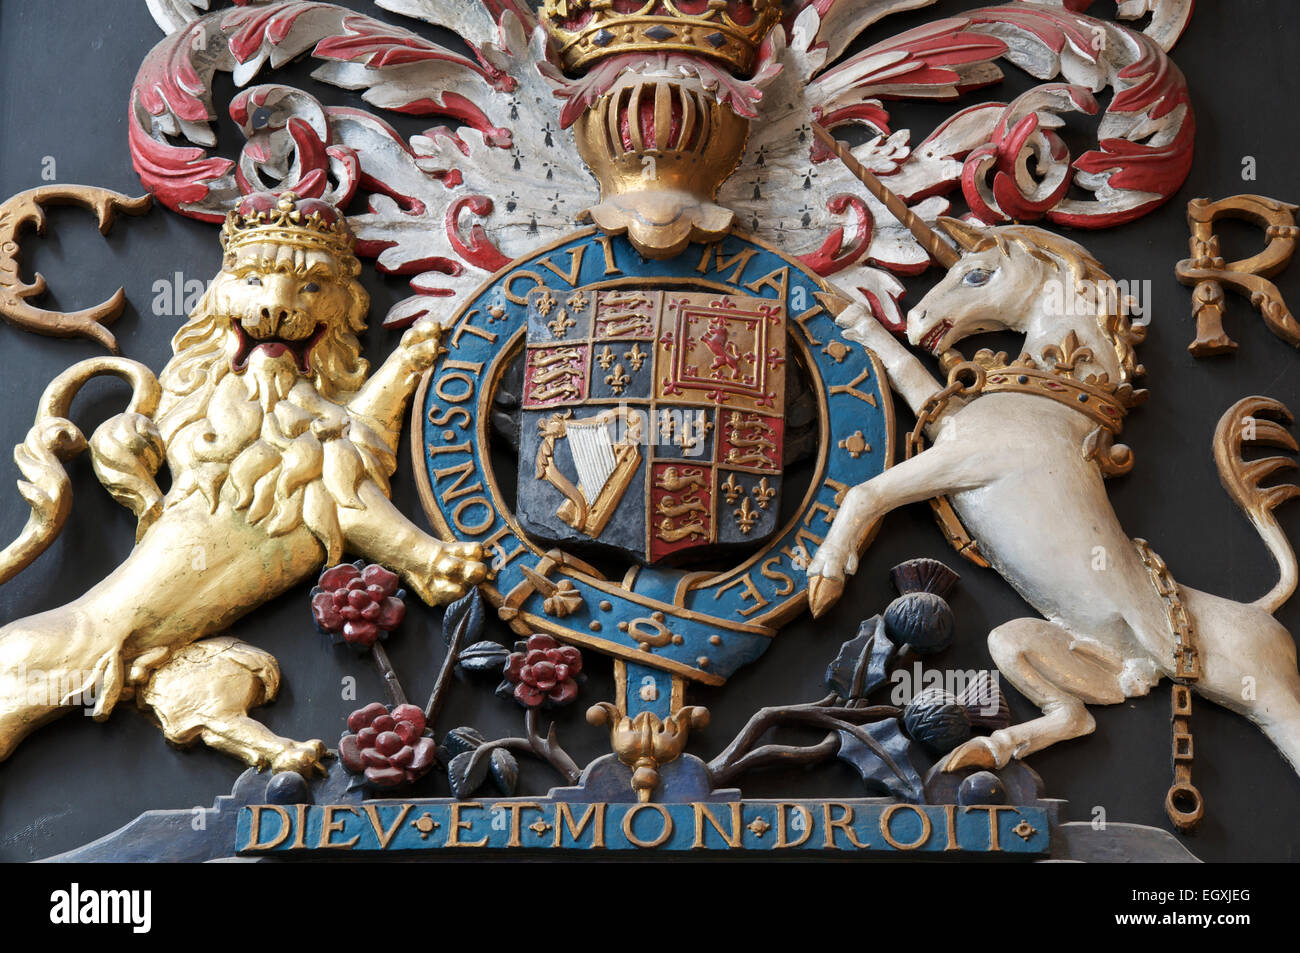 British Monarchy. The Royal Coat of Arms of the Monarch of the United Kingdom. The initials C R for King Charles II. St Peters Church, Dorchester. UK. Stock Photo